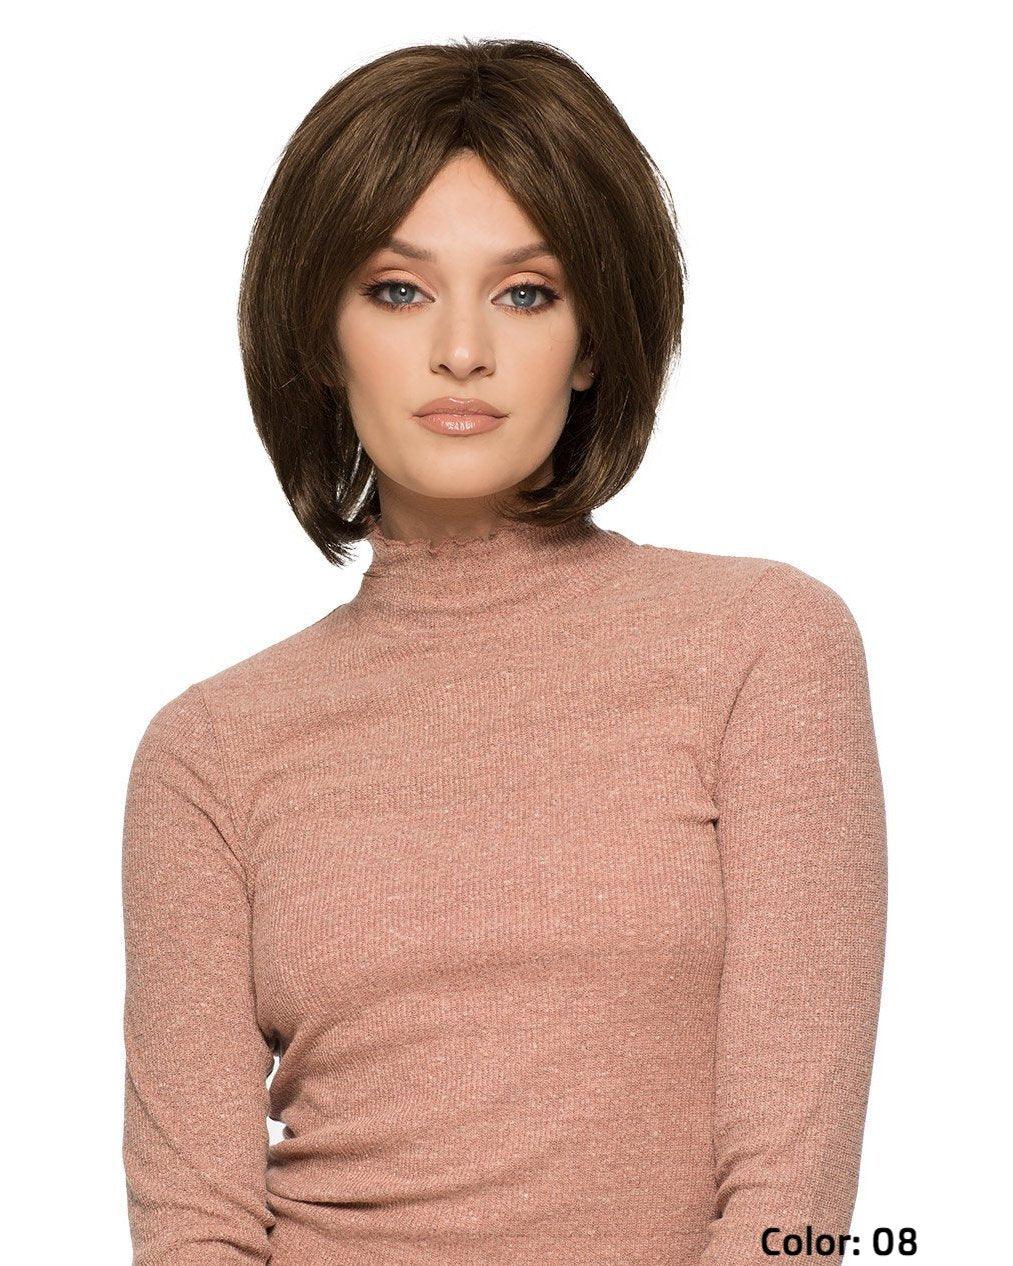 558 M. Cori by WigPro: Synthetic Wig | Clearance Sale